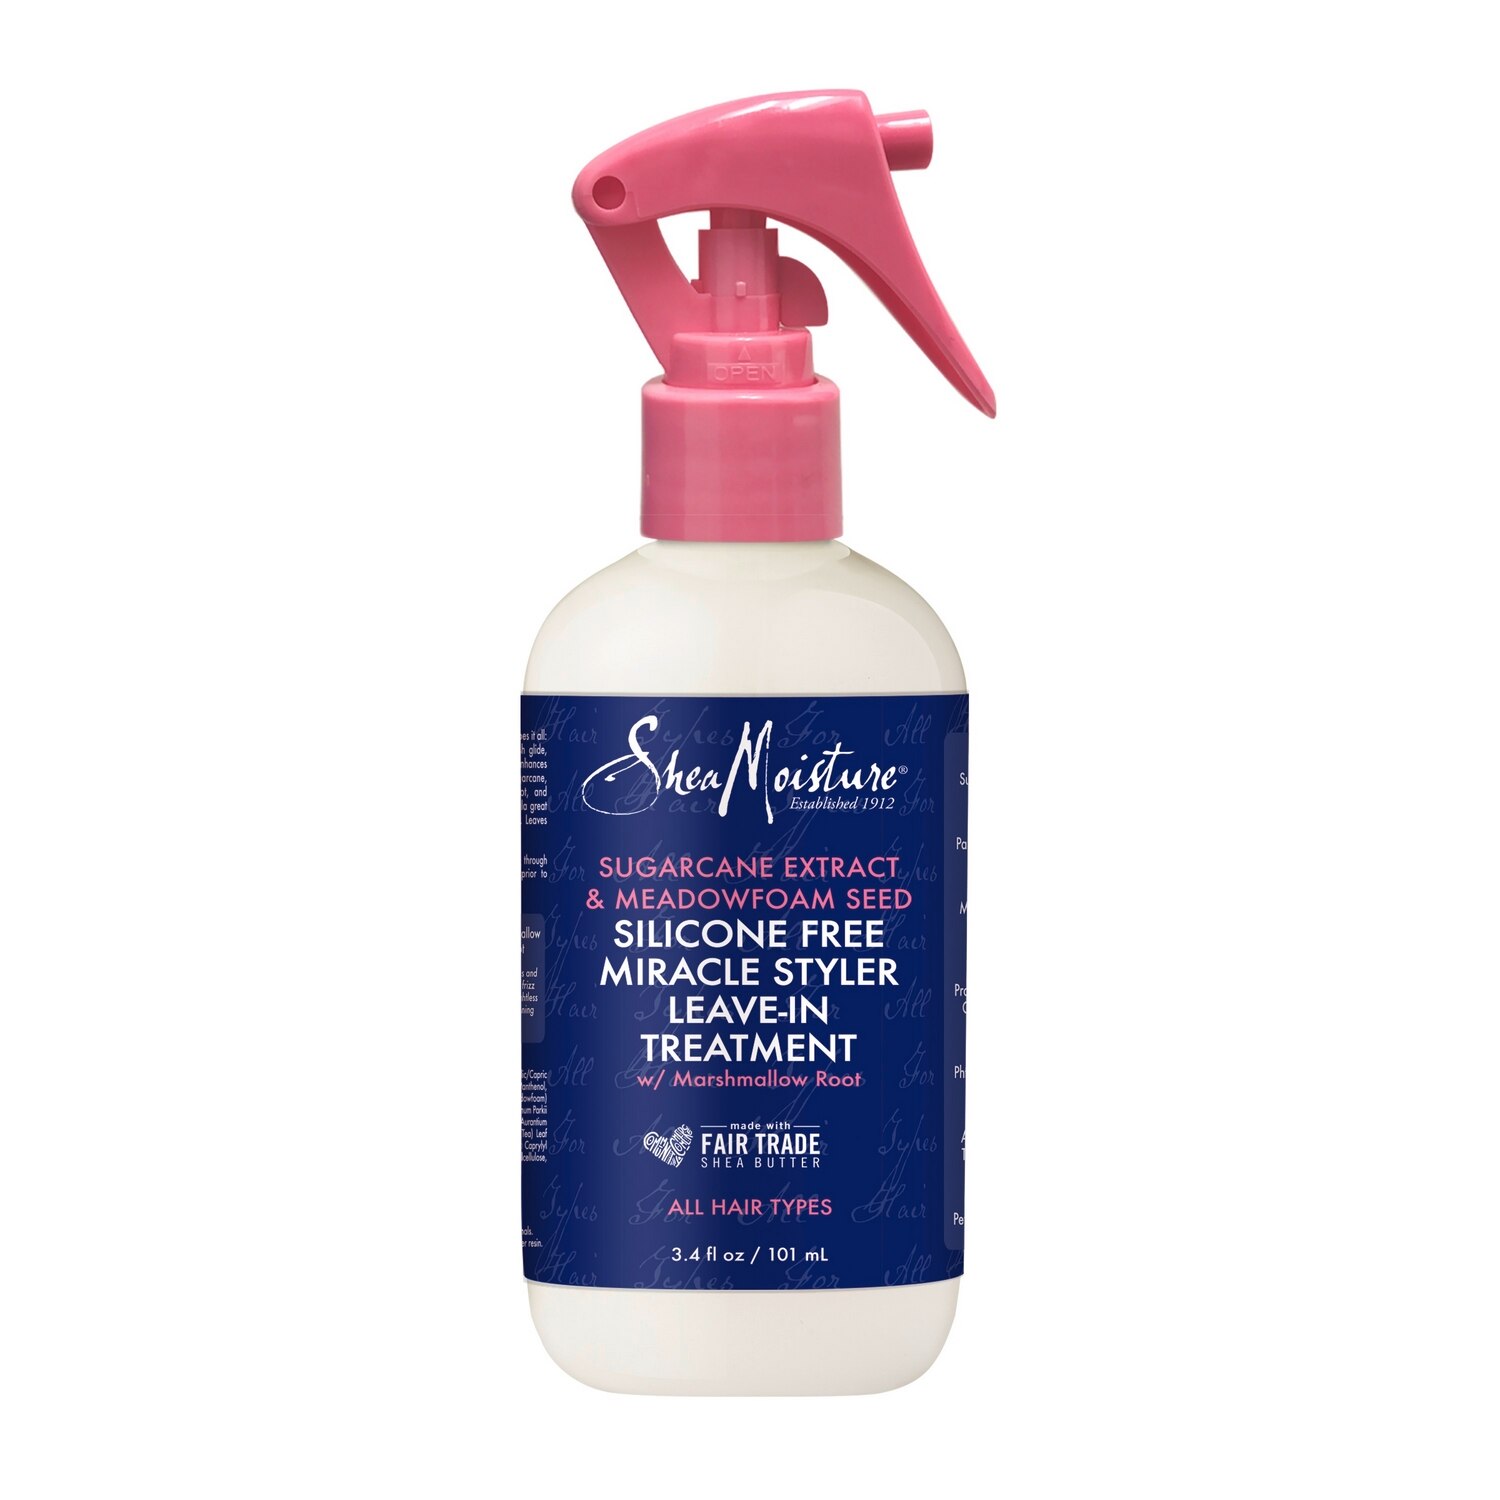 SheaMoisture Silicone-Free Sugarcane Extract Conditioner Leave-In Treatment for All Hair, 3.4 OZ